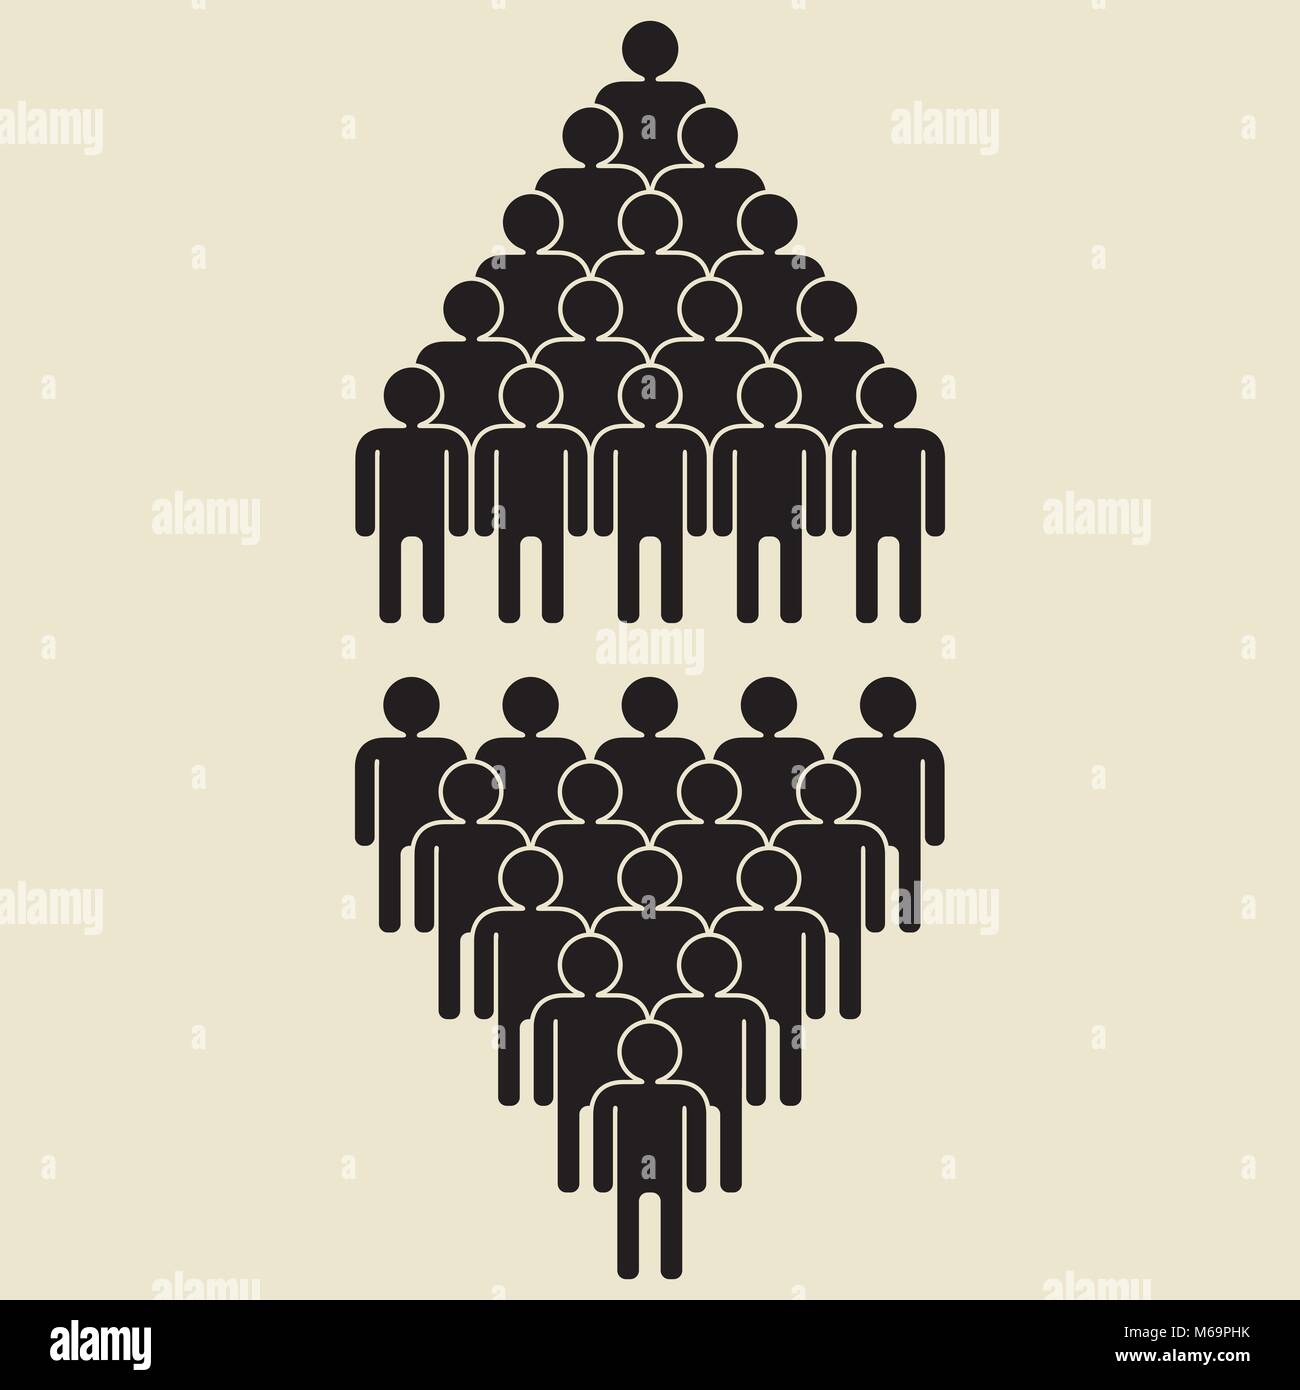 2 crowds headed against each other Stock Vector